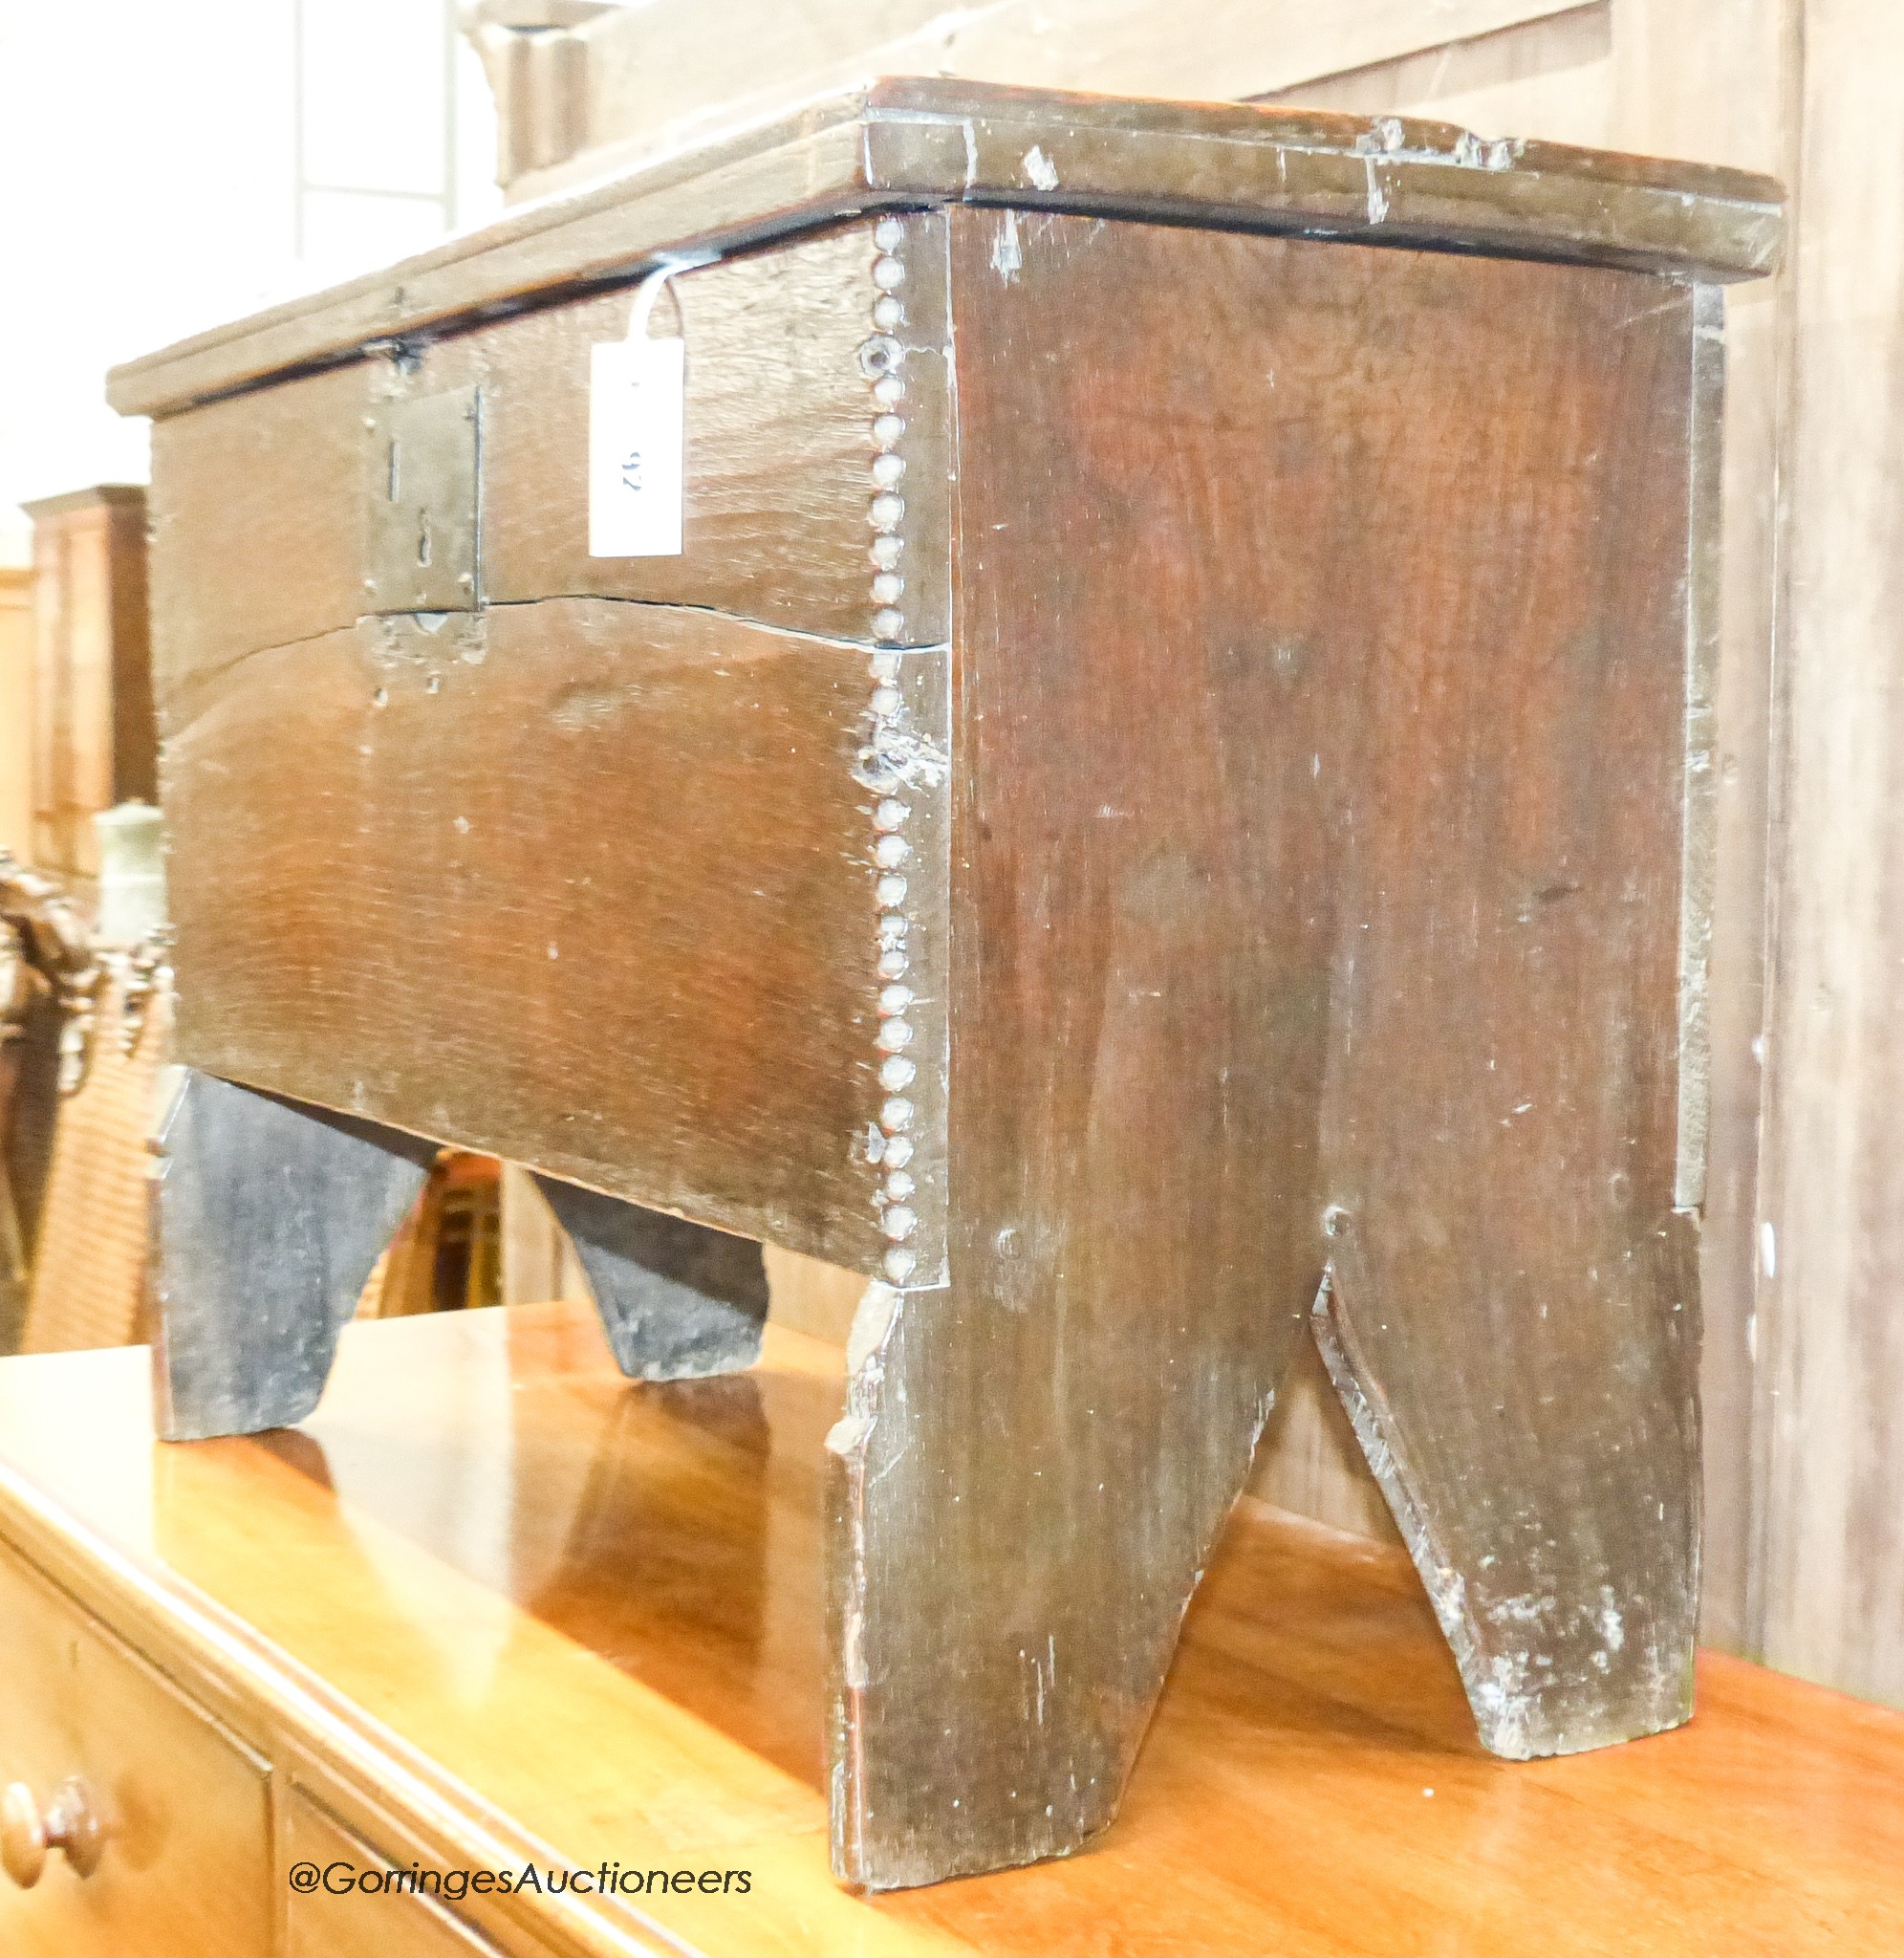 A 17th century oak six-plank coffer of small proportions